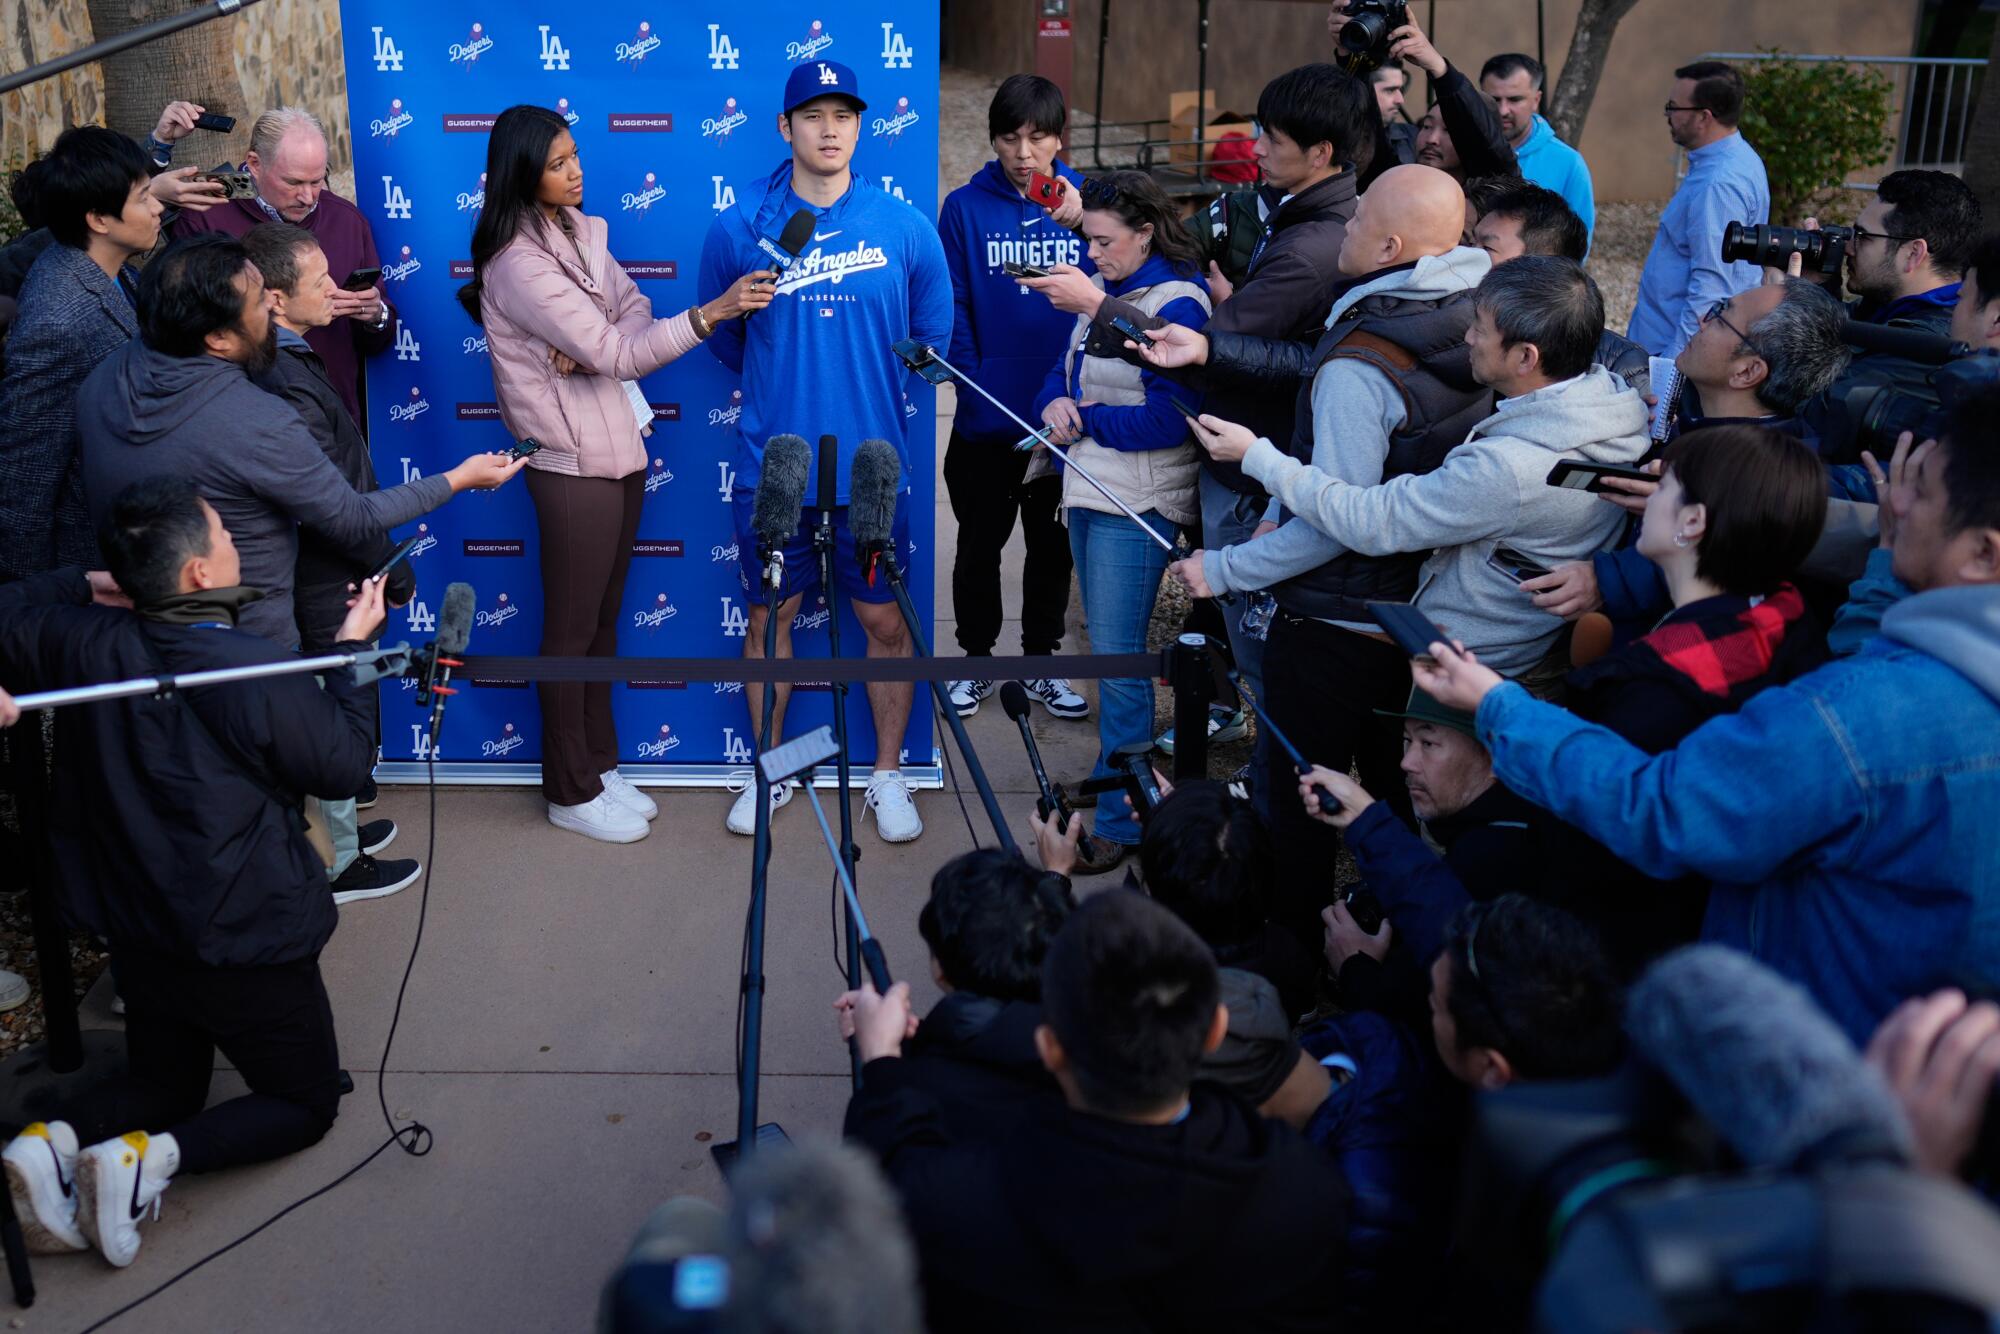 The Dodgers' Shohei Ohtani, with interpreter Ippei Mizuhara, right, speaks to the media at Camelback Ranch.